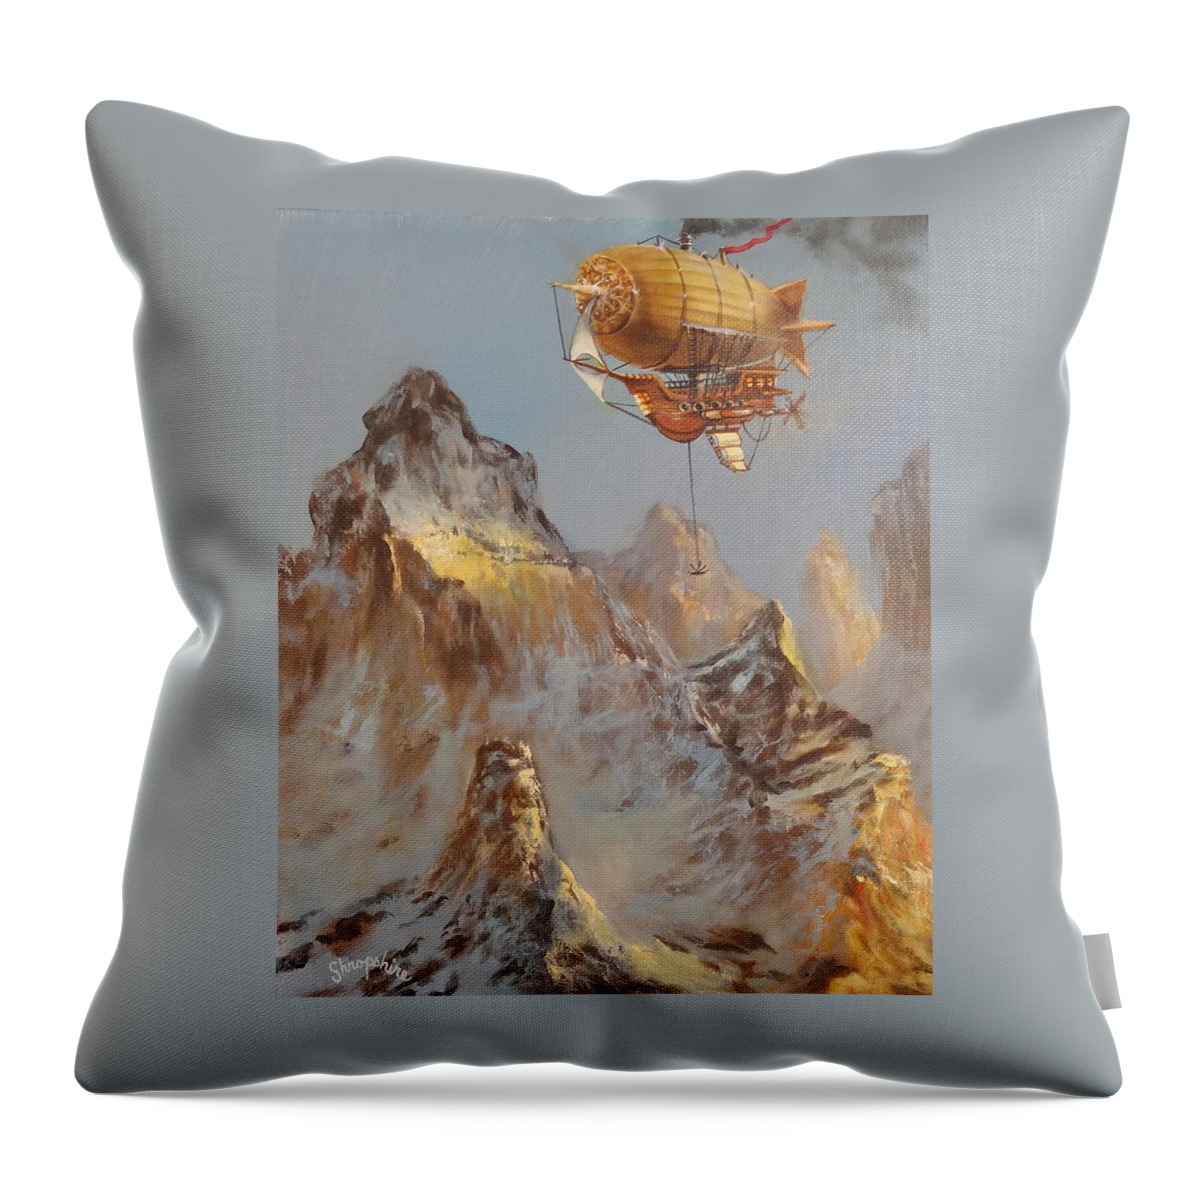 Airship Throw Pillow featuring the painting Airship Over the Mountain by Tom Shropshire